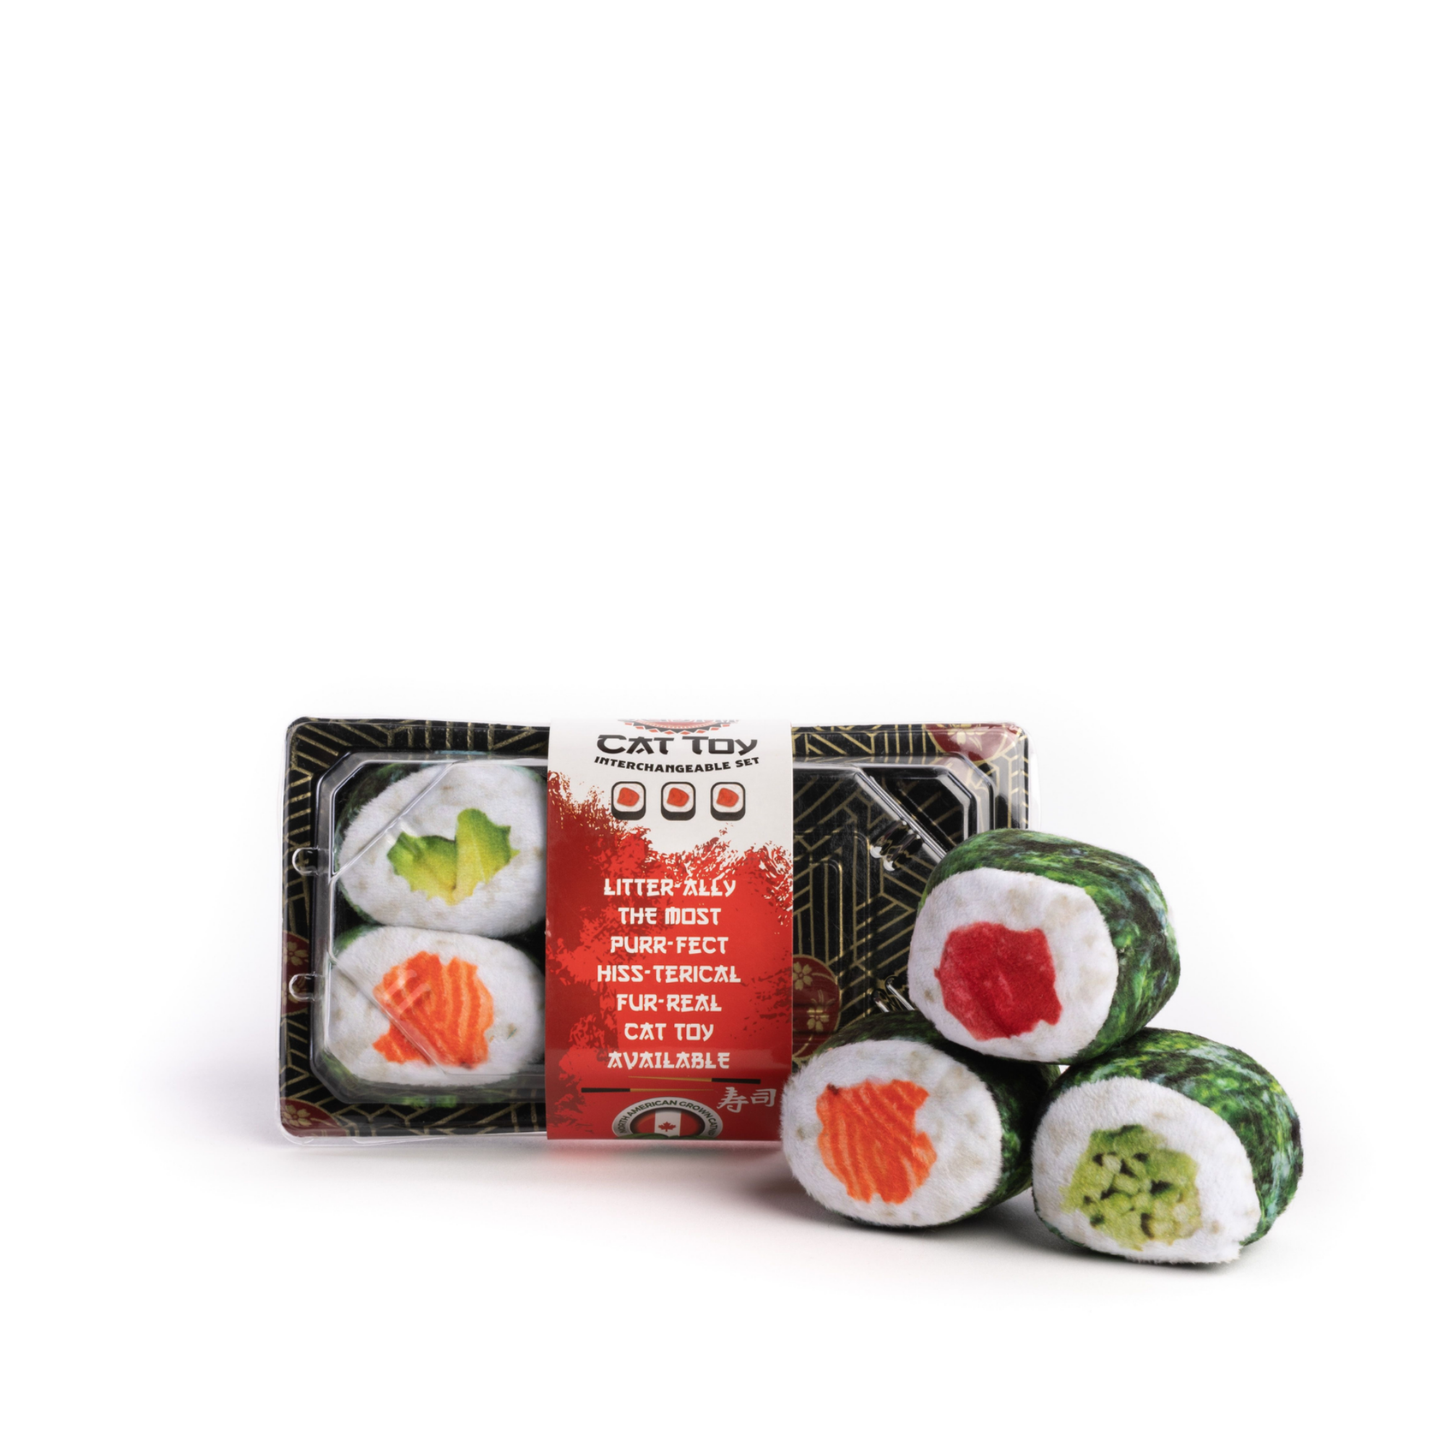 Cat toys made to look like different cut sushi rolls